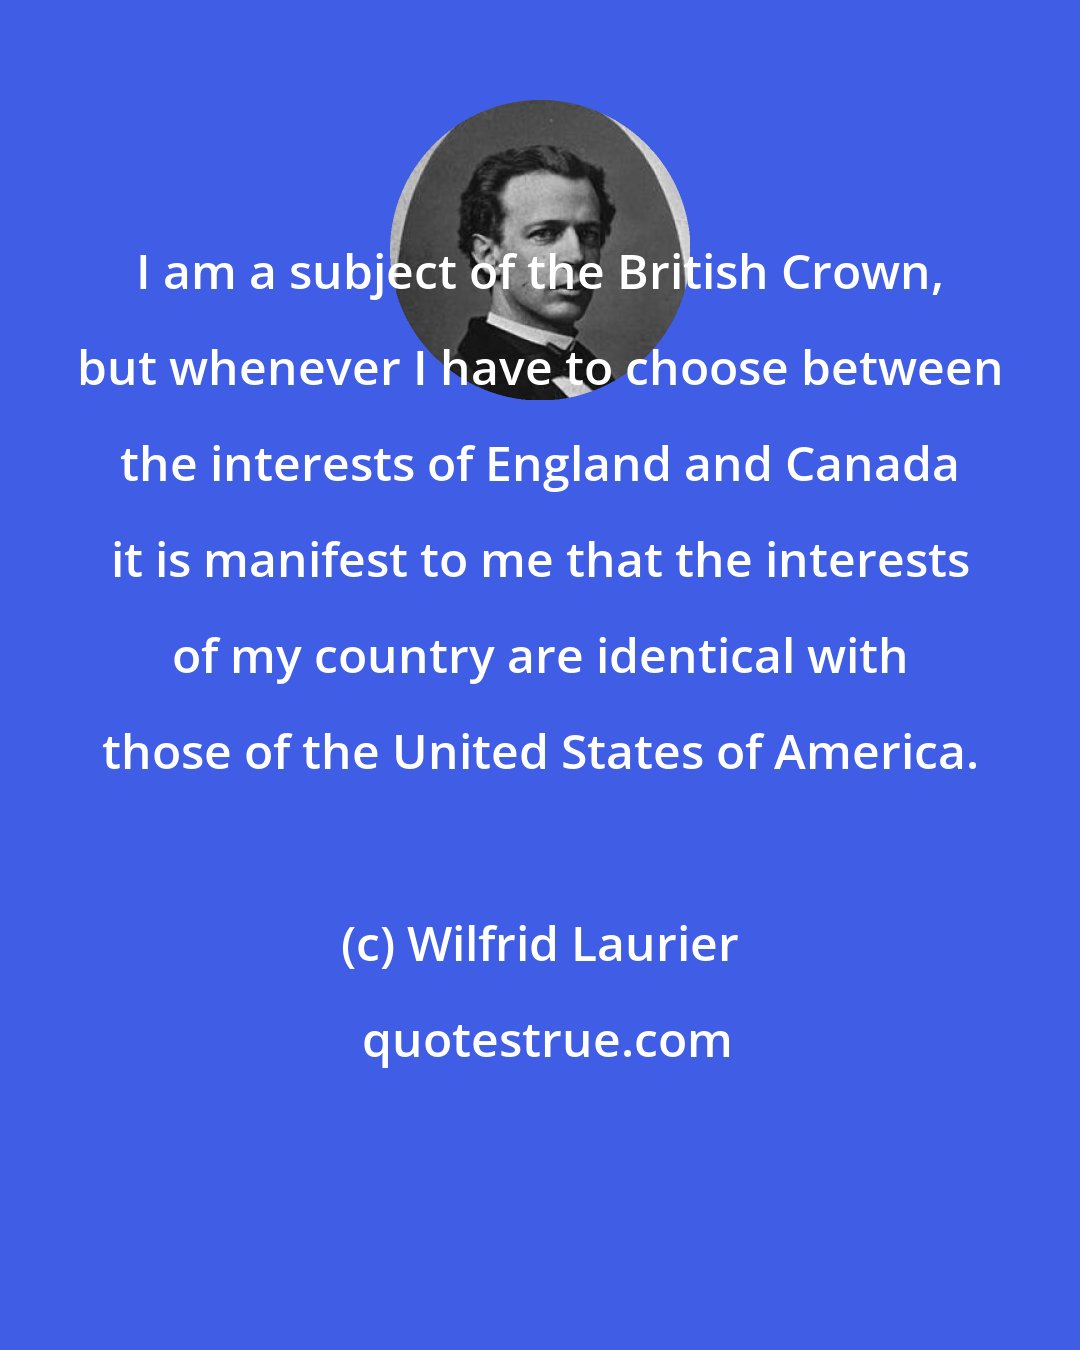 Wilfrid Laurier: I am a subject of the British Crown, but whenever I have to choose between the interests of England and Canada it is manifest to me that the interests of my country are identical with those of the United States of America.